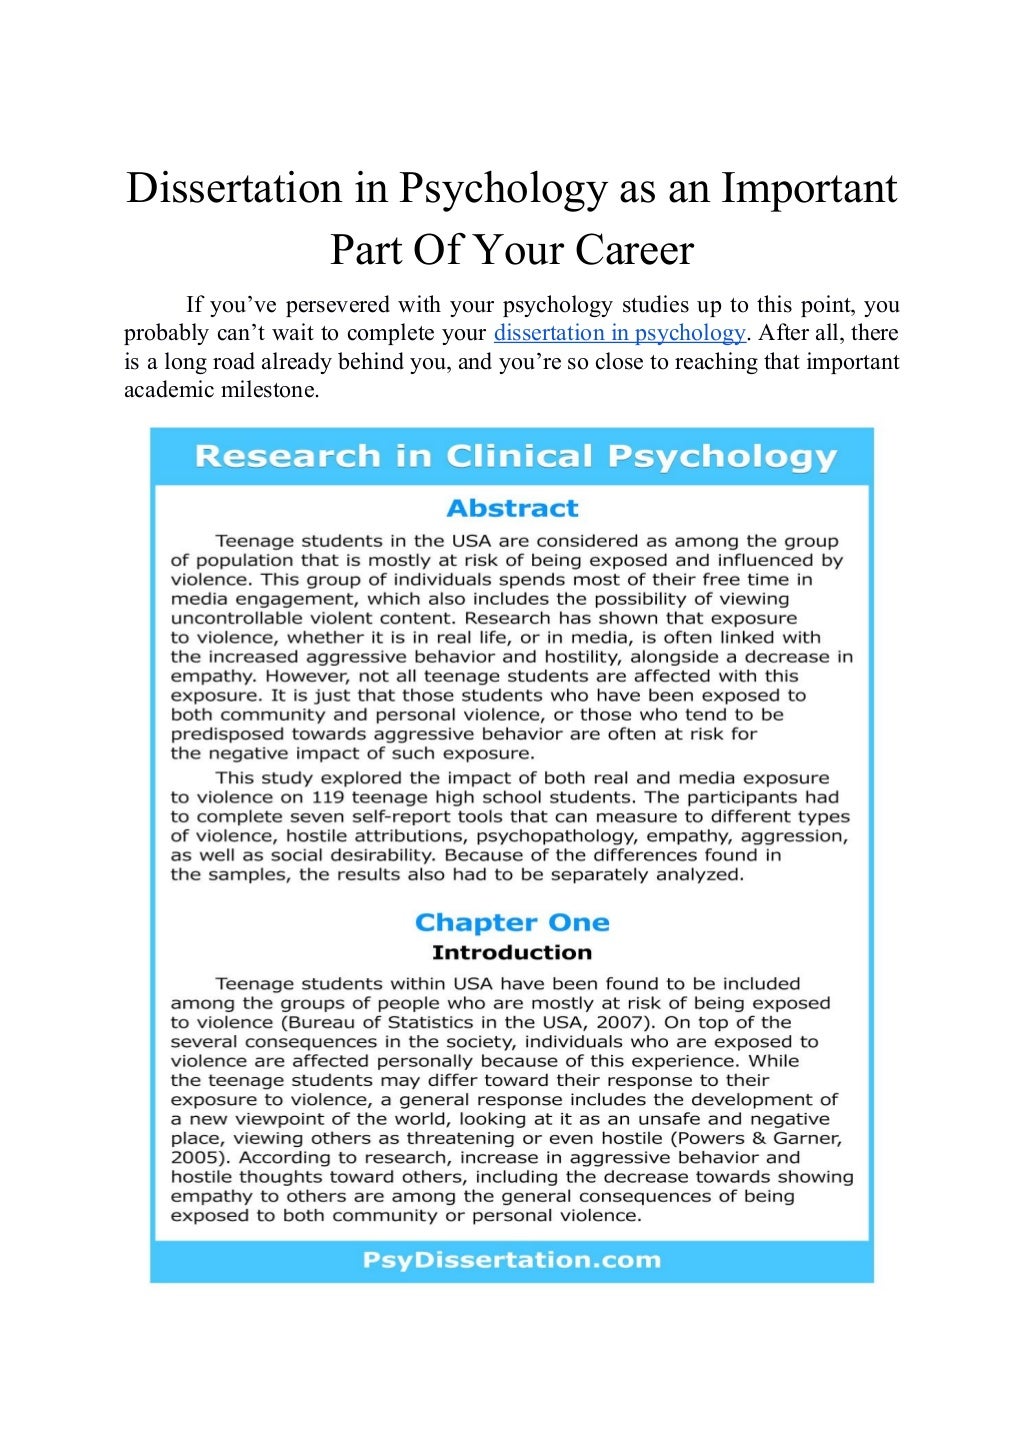 importance of dissertation in psychology